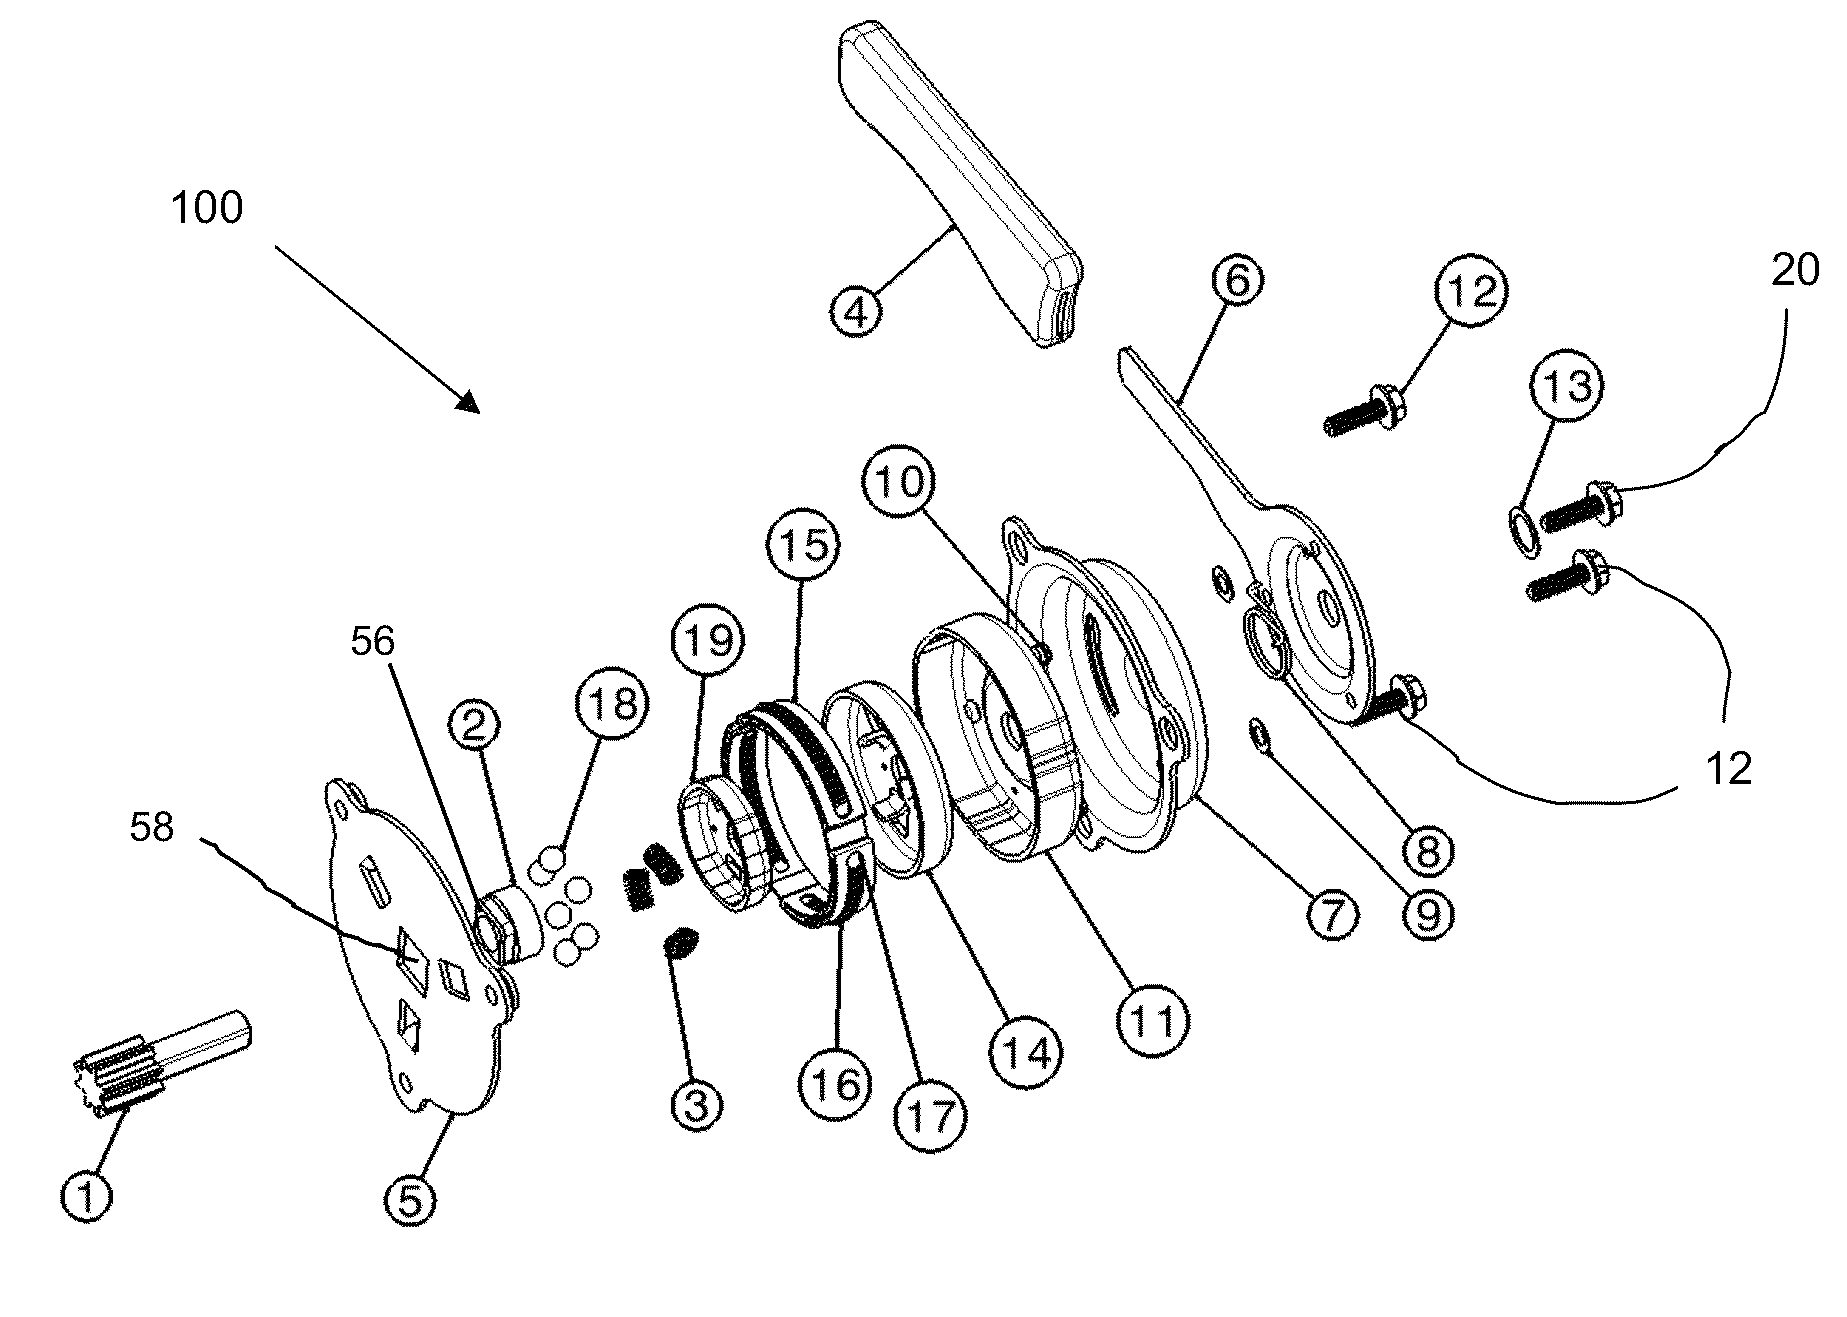 Seat height adjustment actuating device